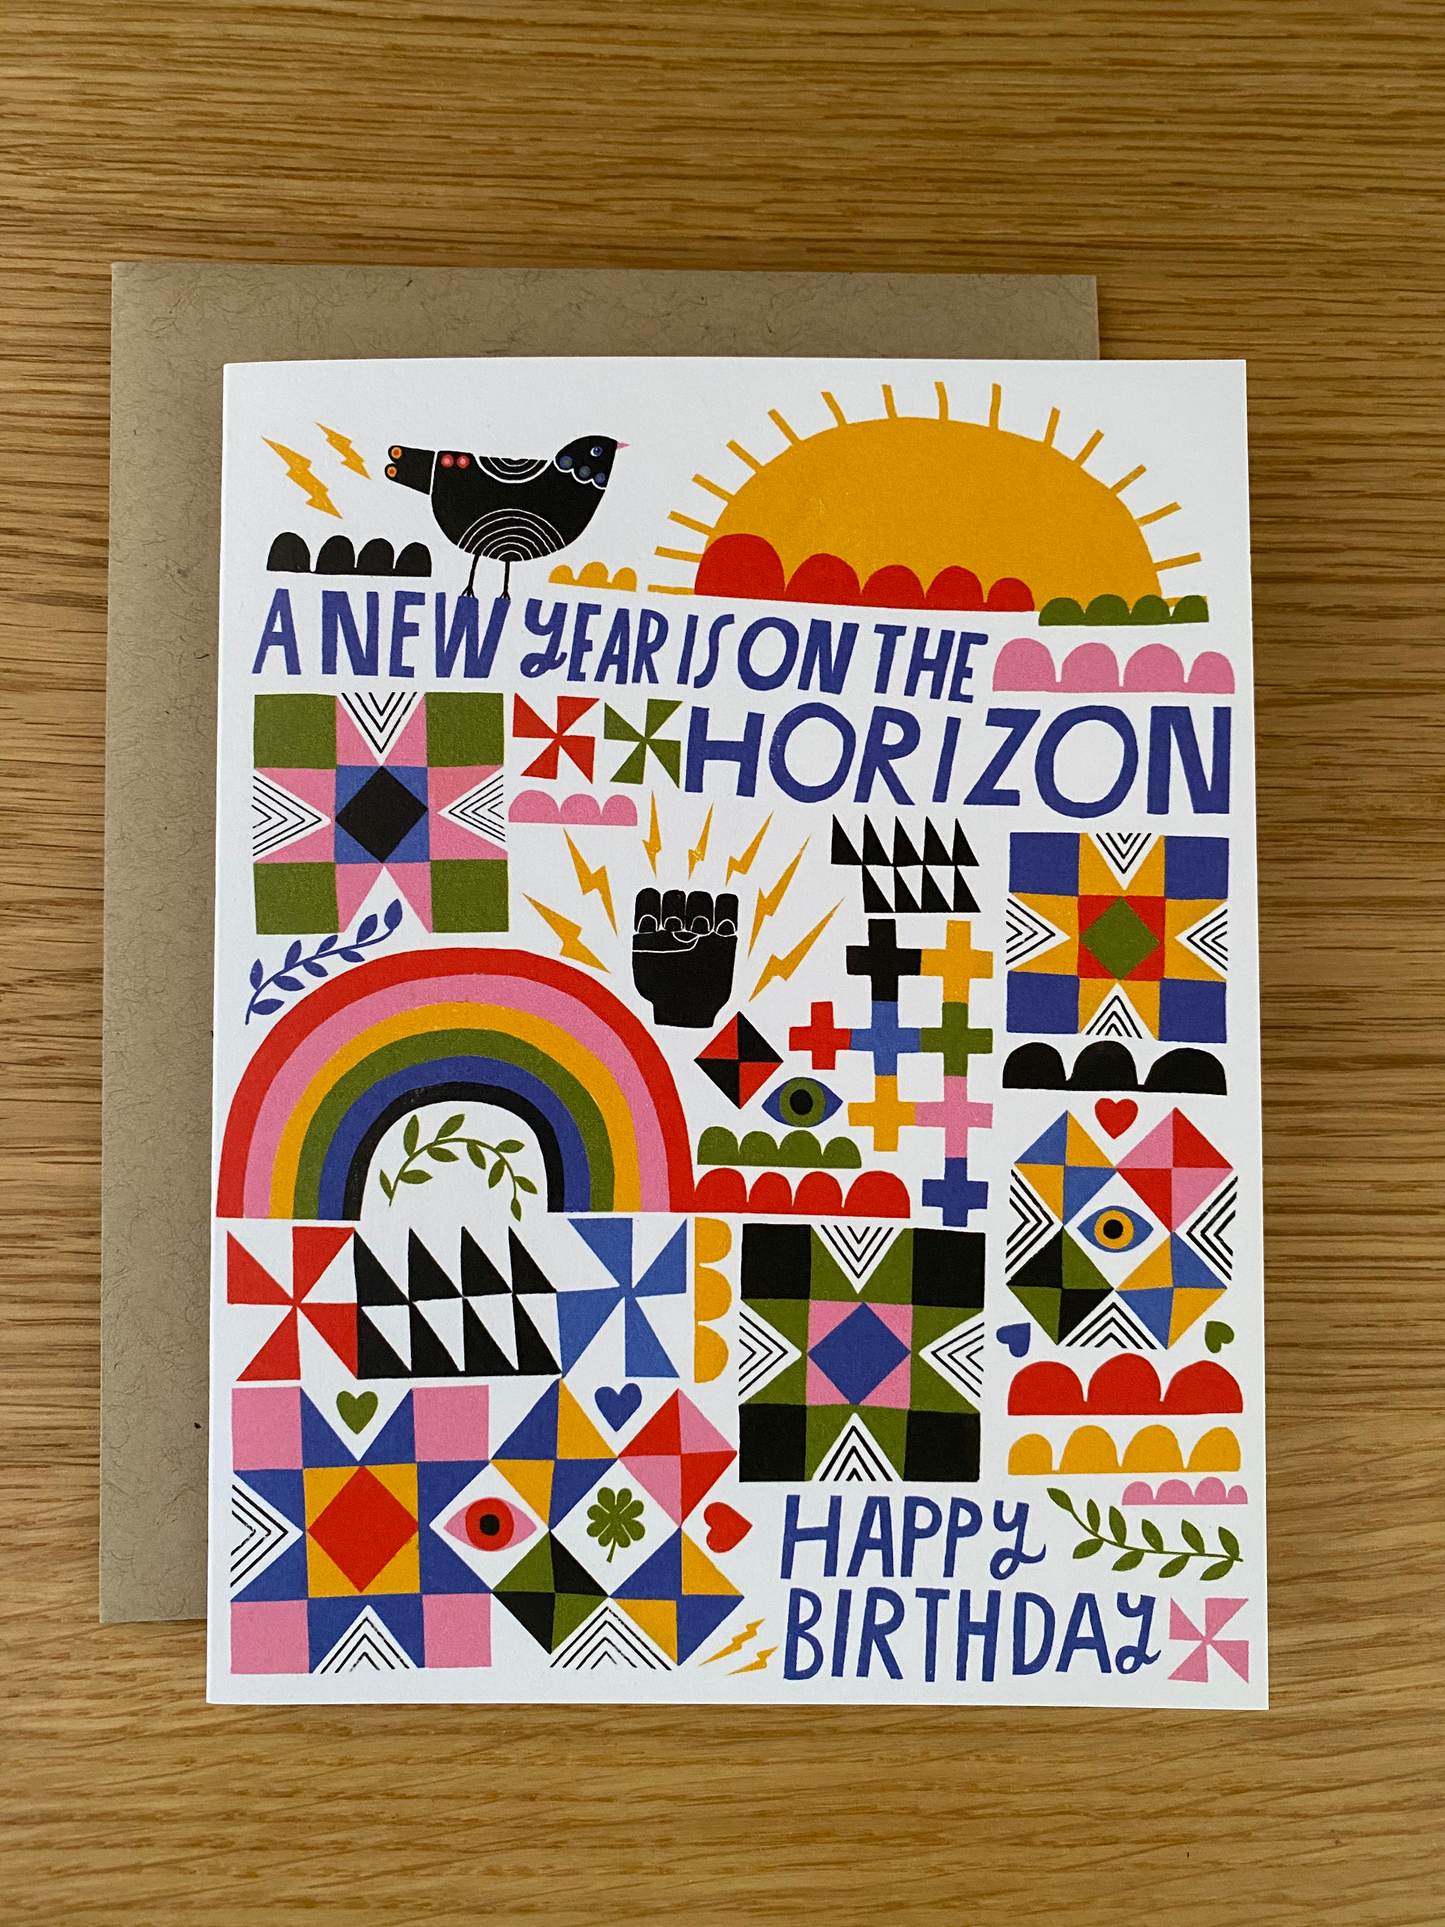 New Year is on the Horizon bold graphic birthday card by Emily McDowell